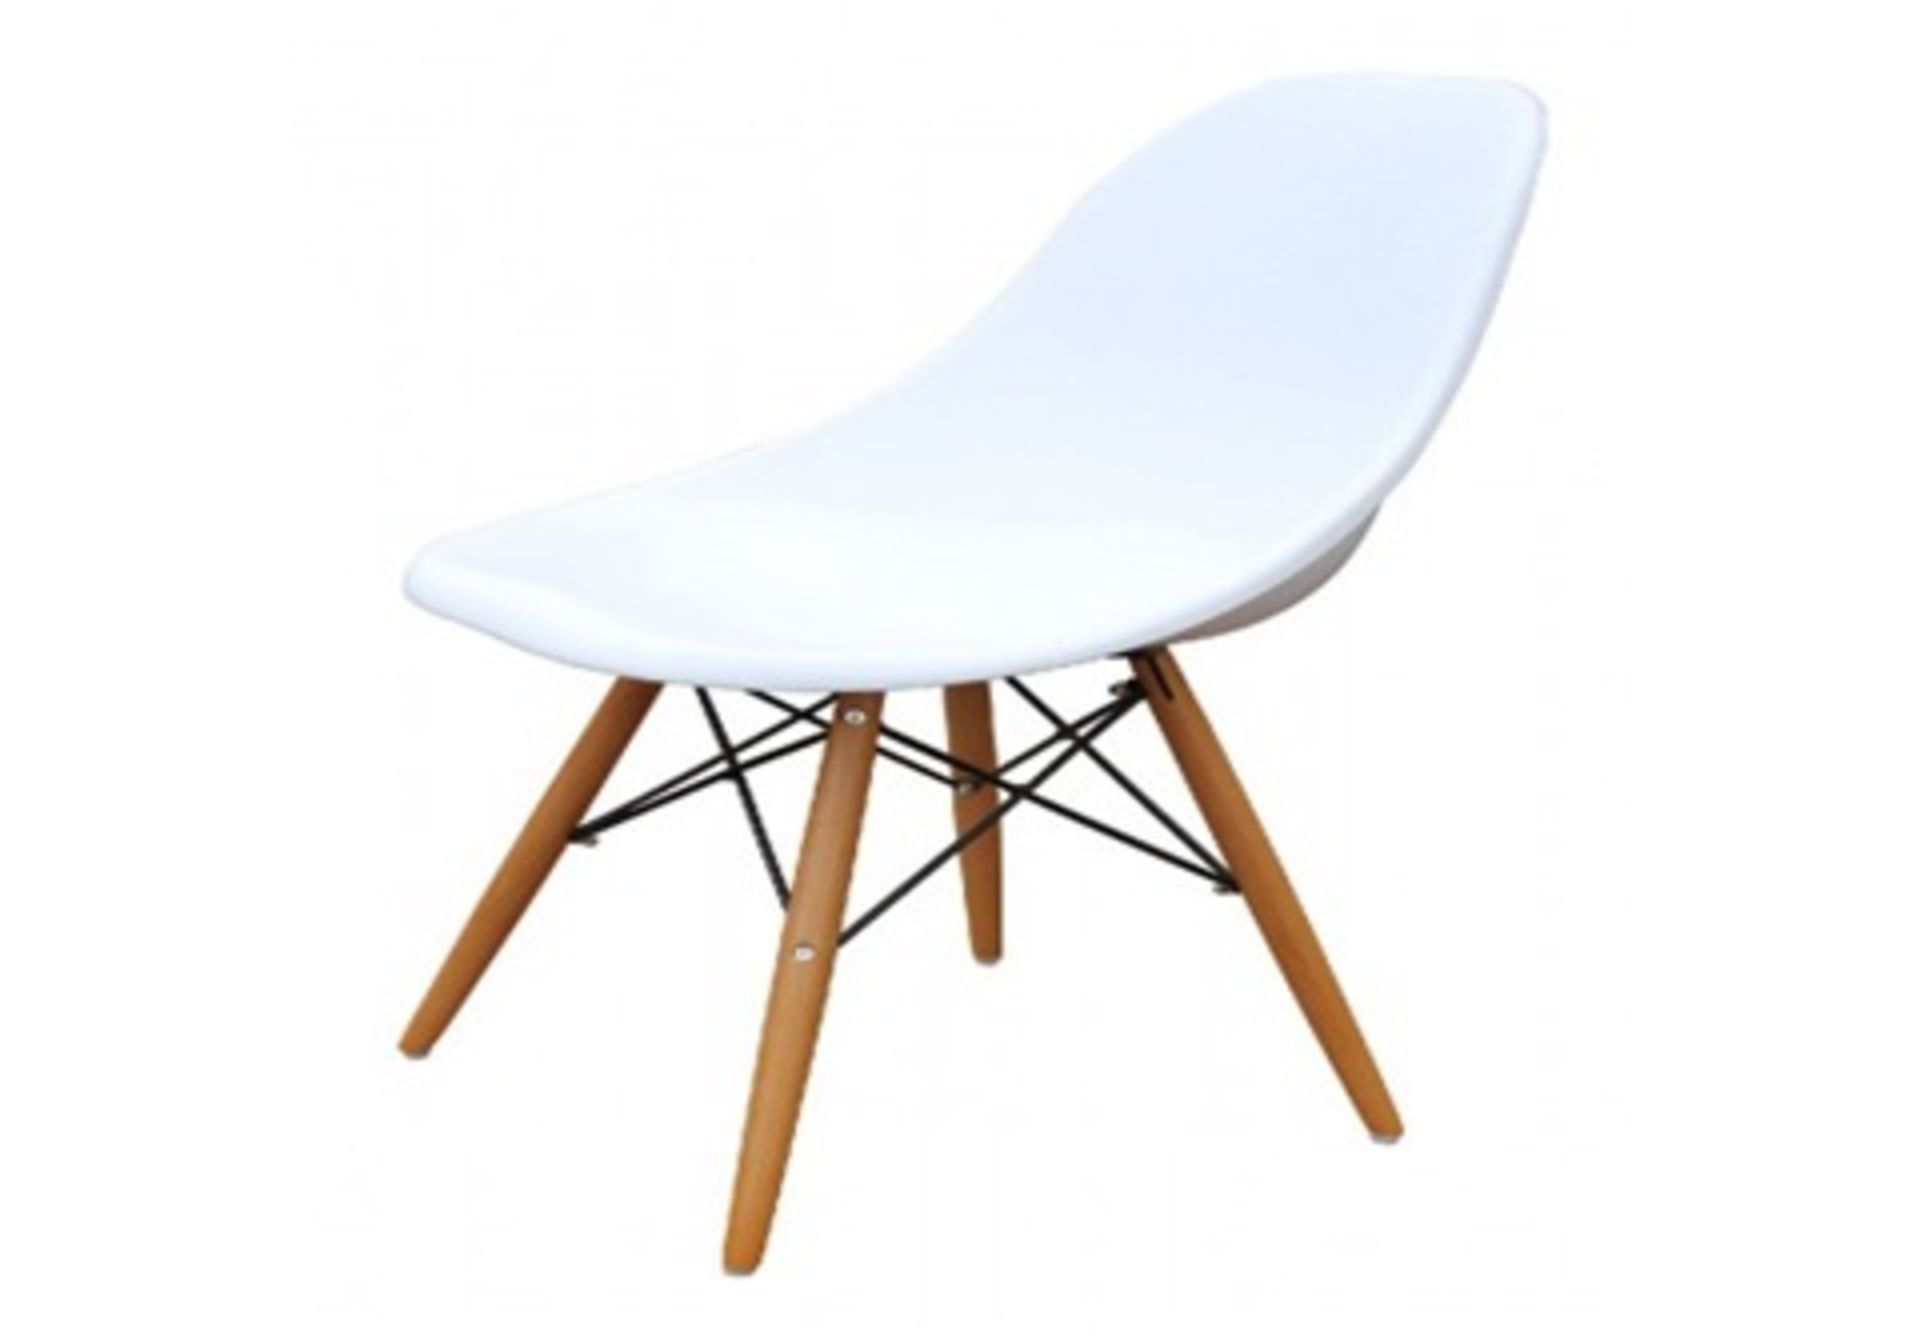 4 x Eames Style Chairs White With Natural Legs - DCH103 White (Brand New)